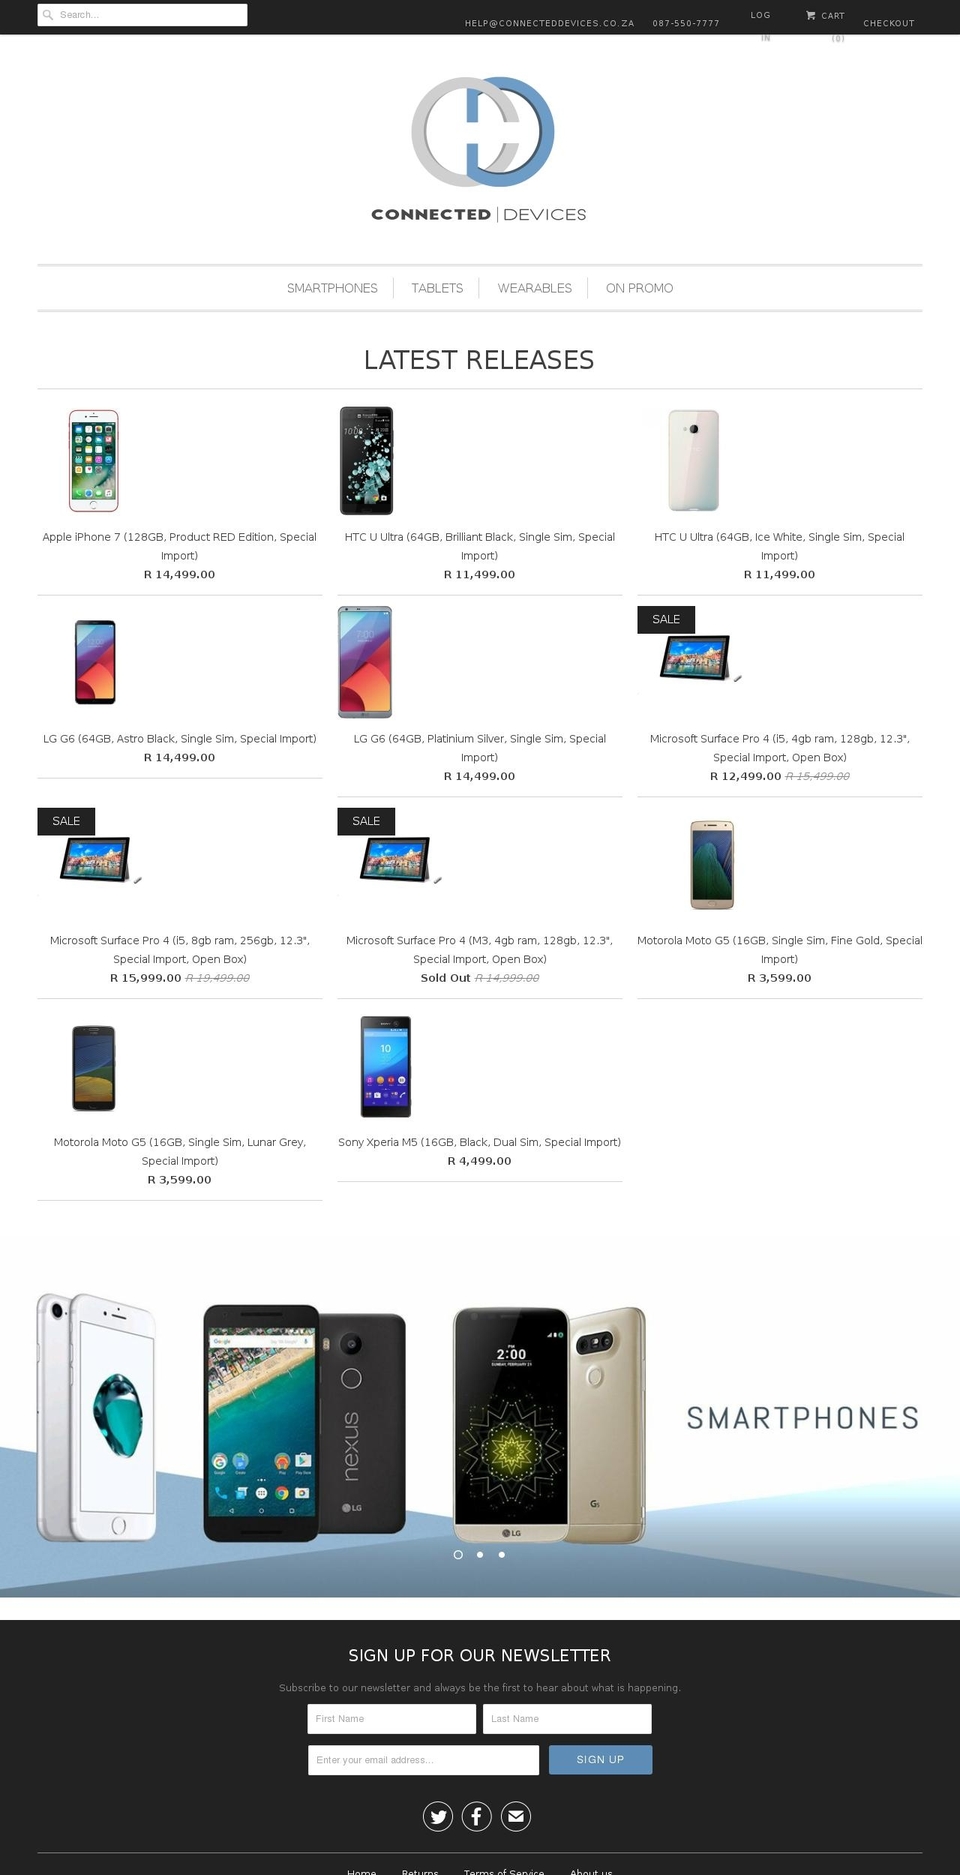 connecteddevices.co.za shopify website screenshot